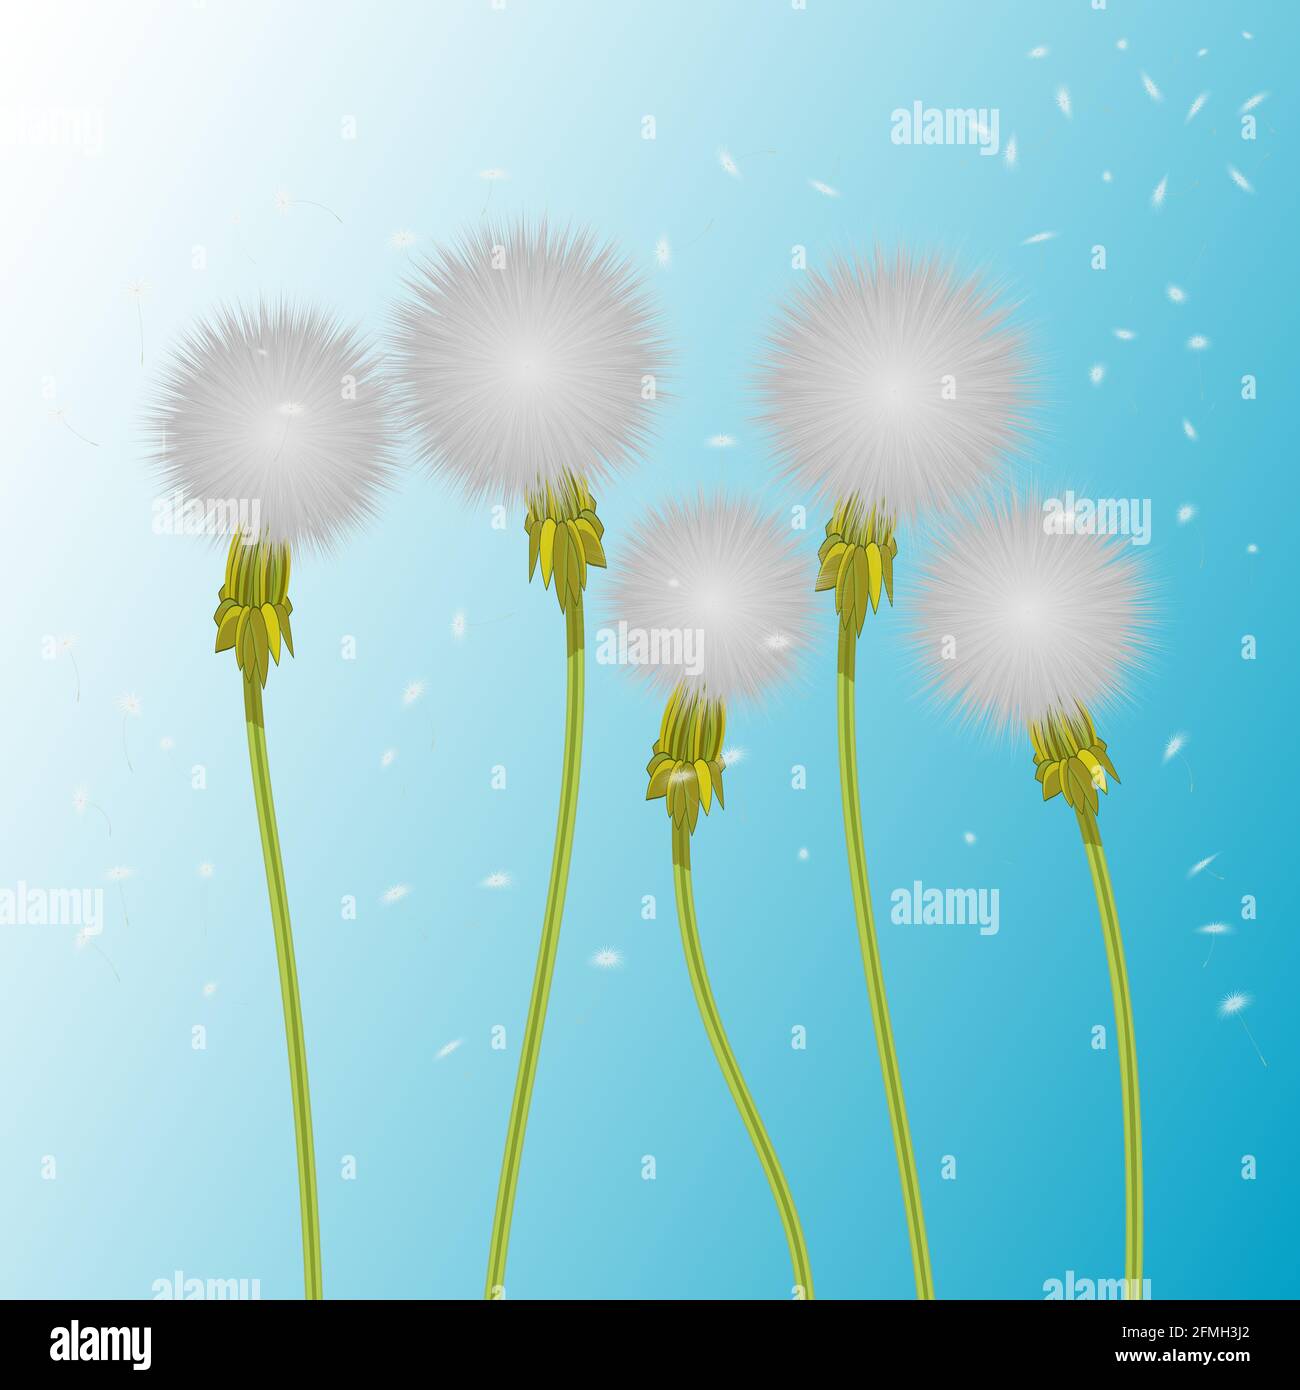 Vector illustration of 5 realistic white dandelion. Five fluffy dandelions blowing in the wind and flying seeds of it. The wind inflates a dandelion Stock Vector